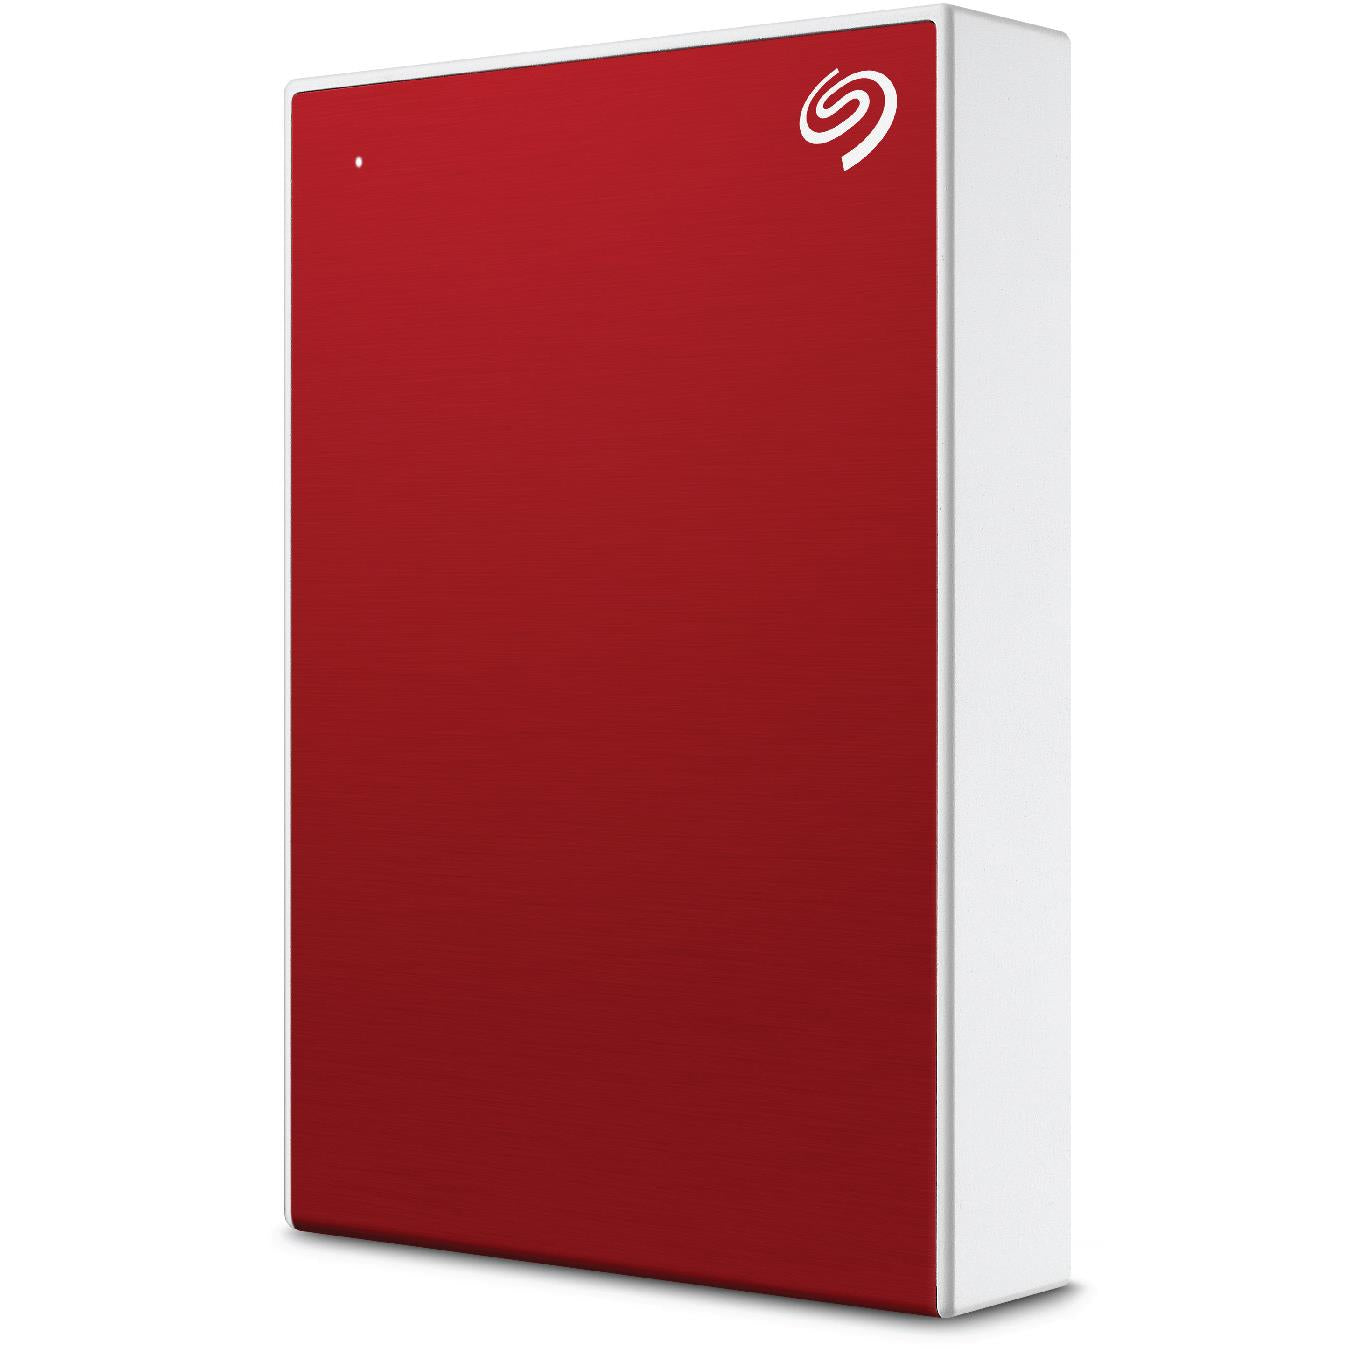 seagate one touch portable 4tb hard drive (red)